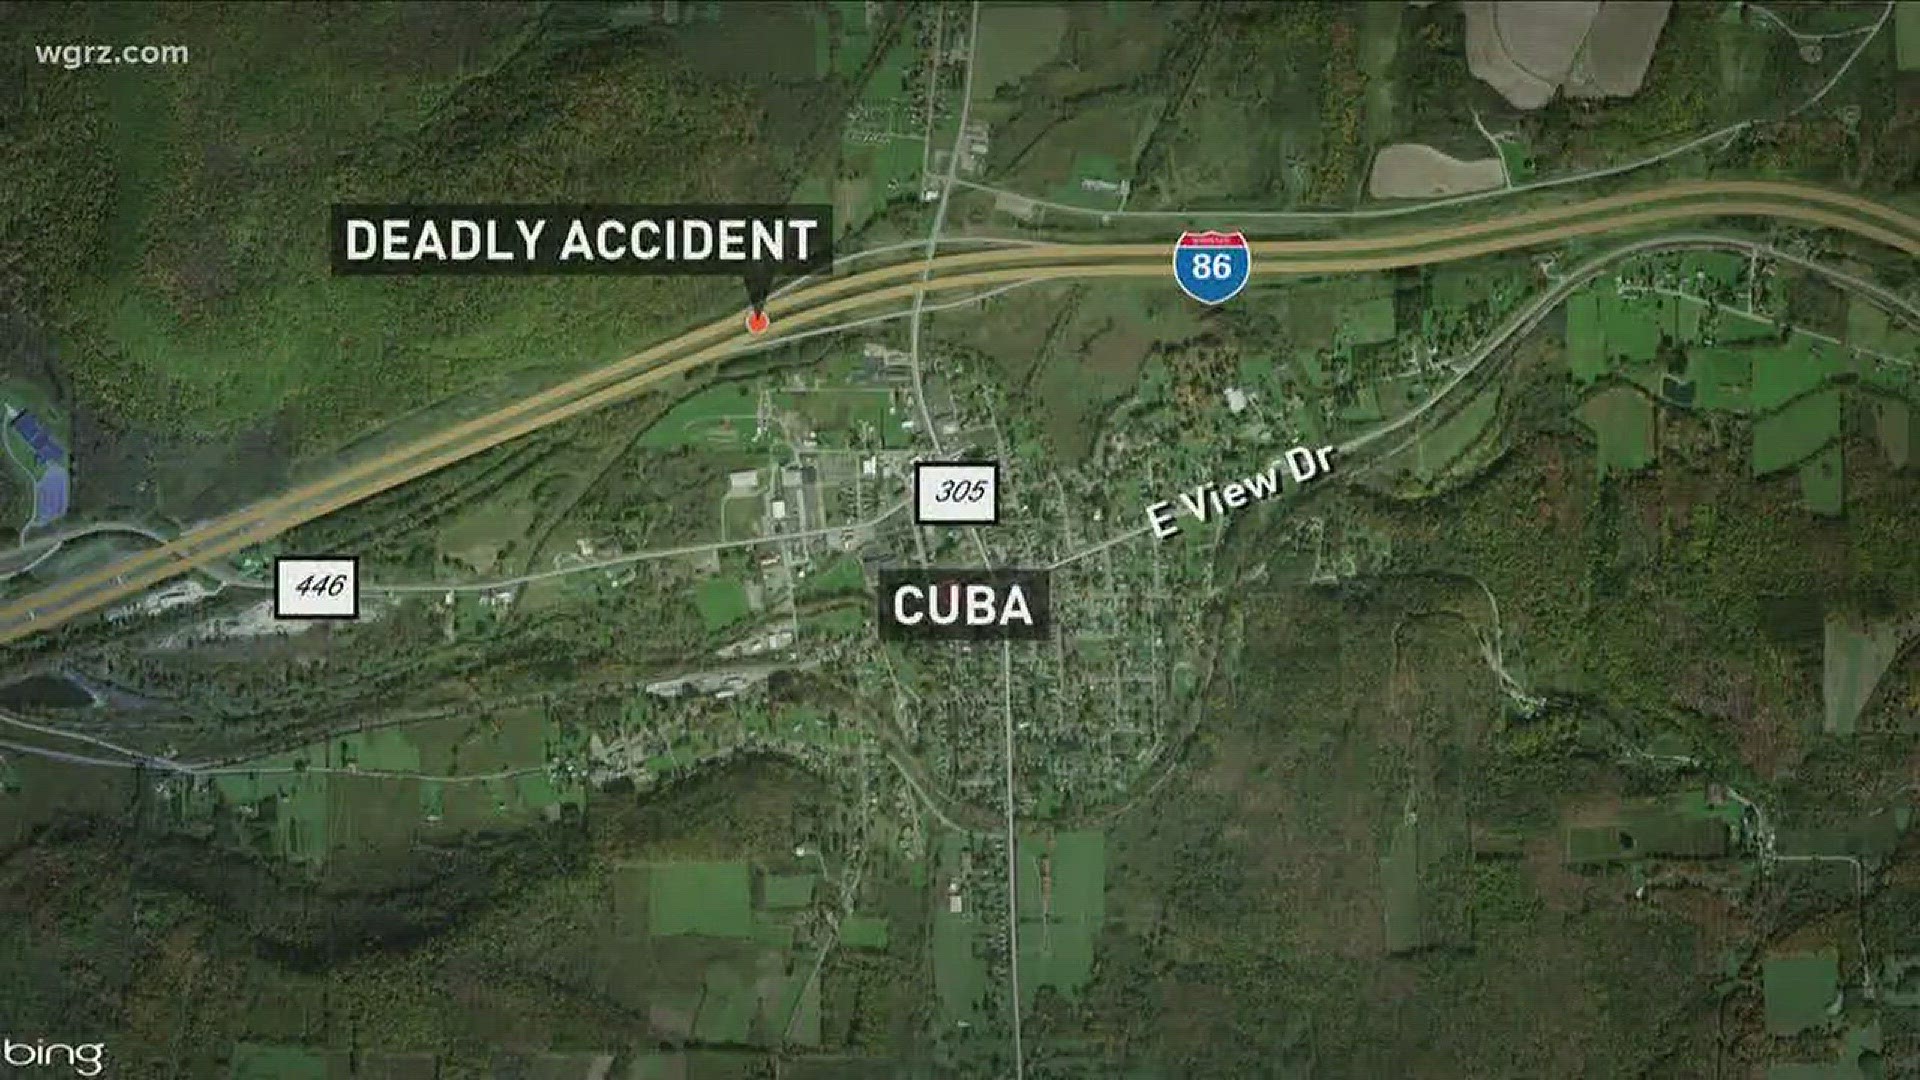 Police investigate fatal accident on I-86 in Cuba